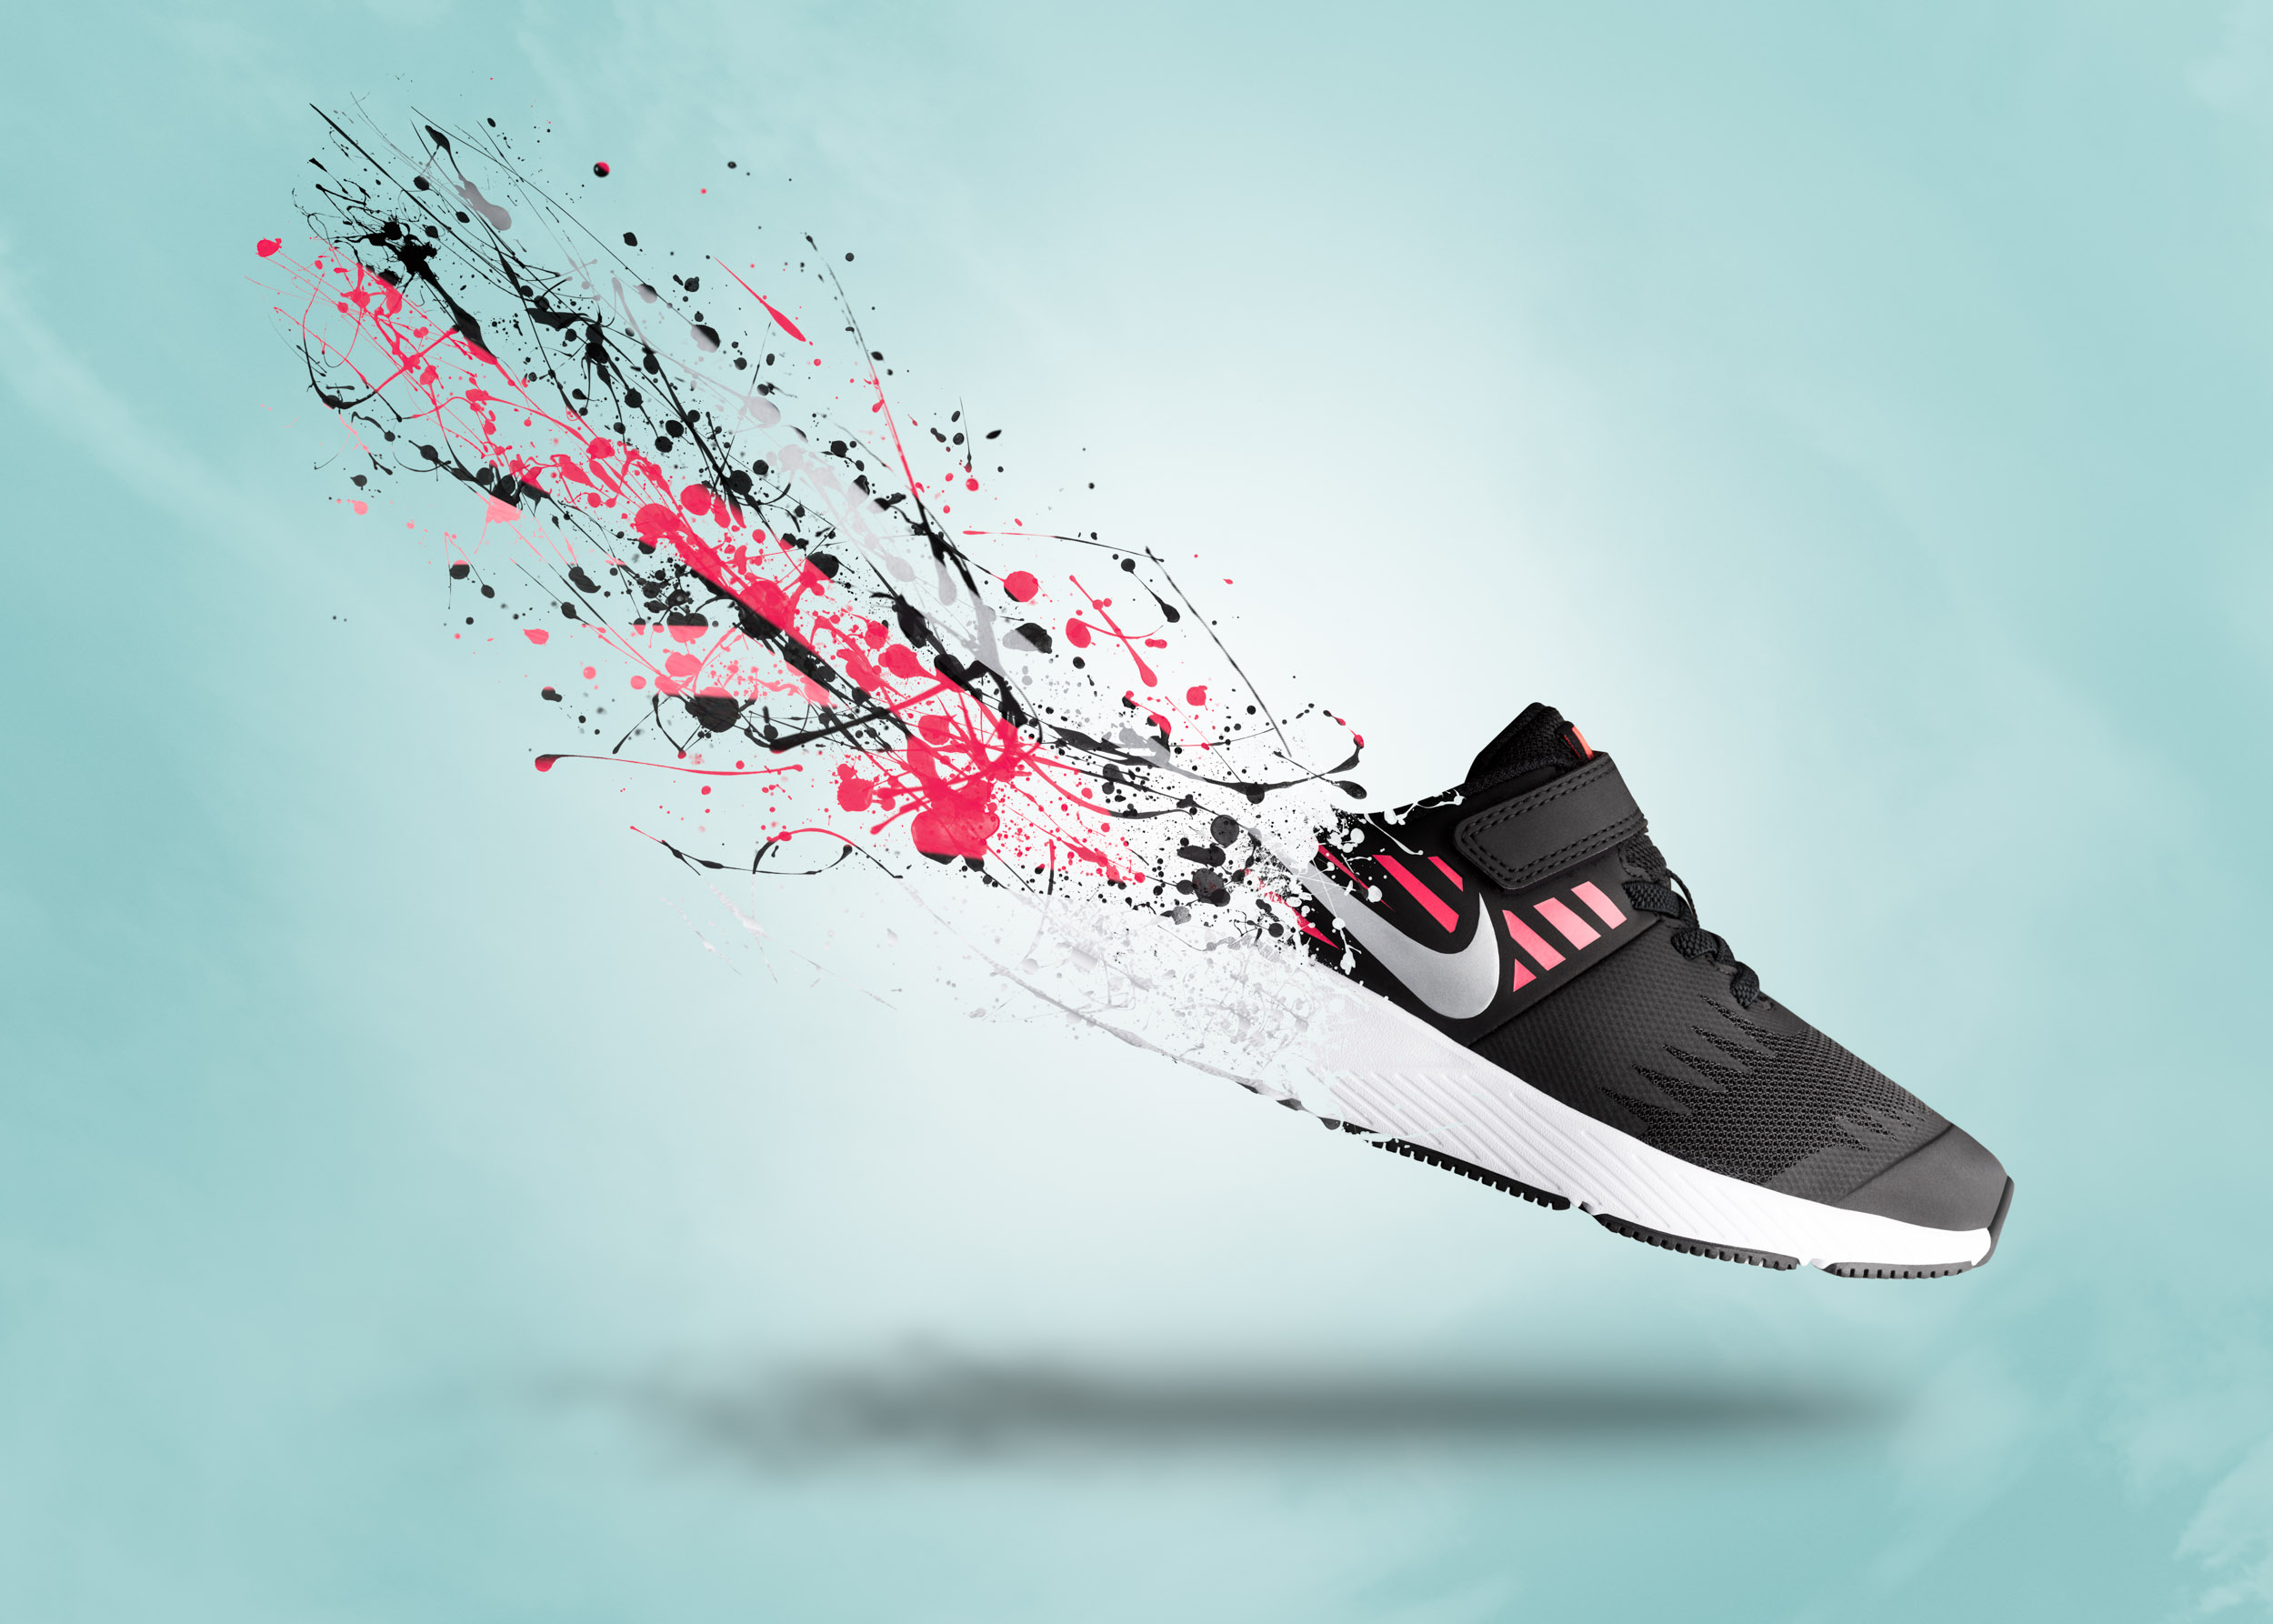 Black Nike with Paint Splatters | Commercial Product Shot 